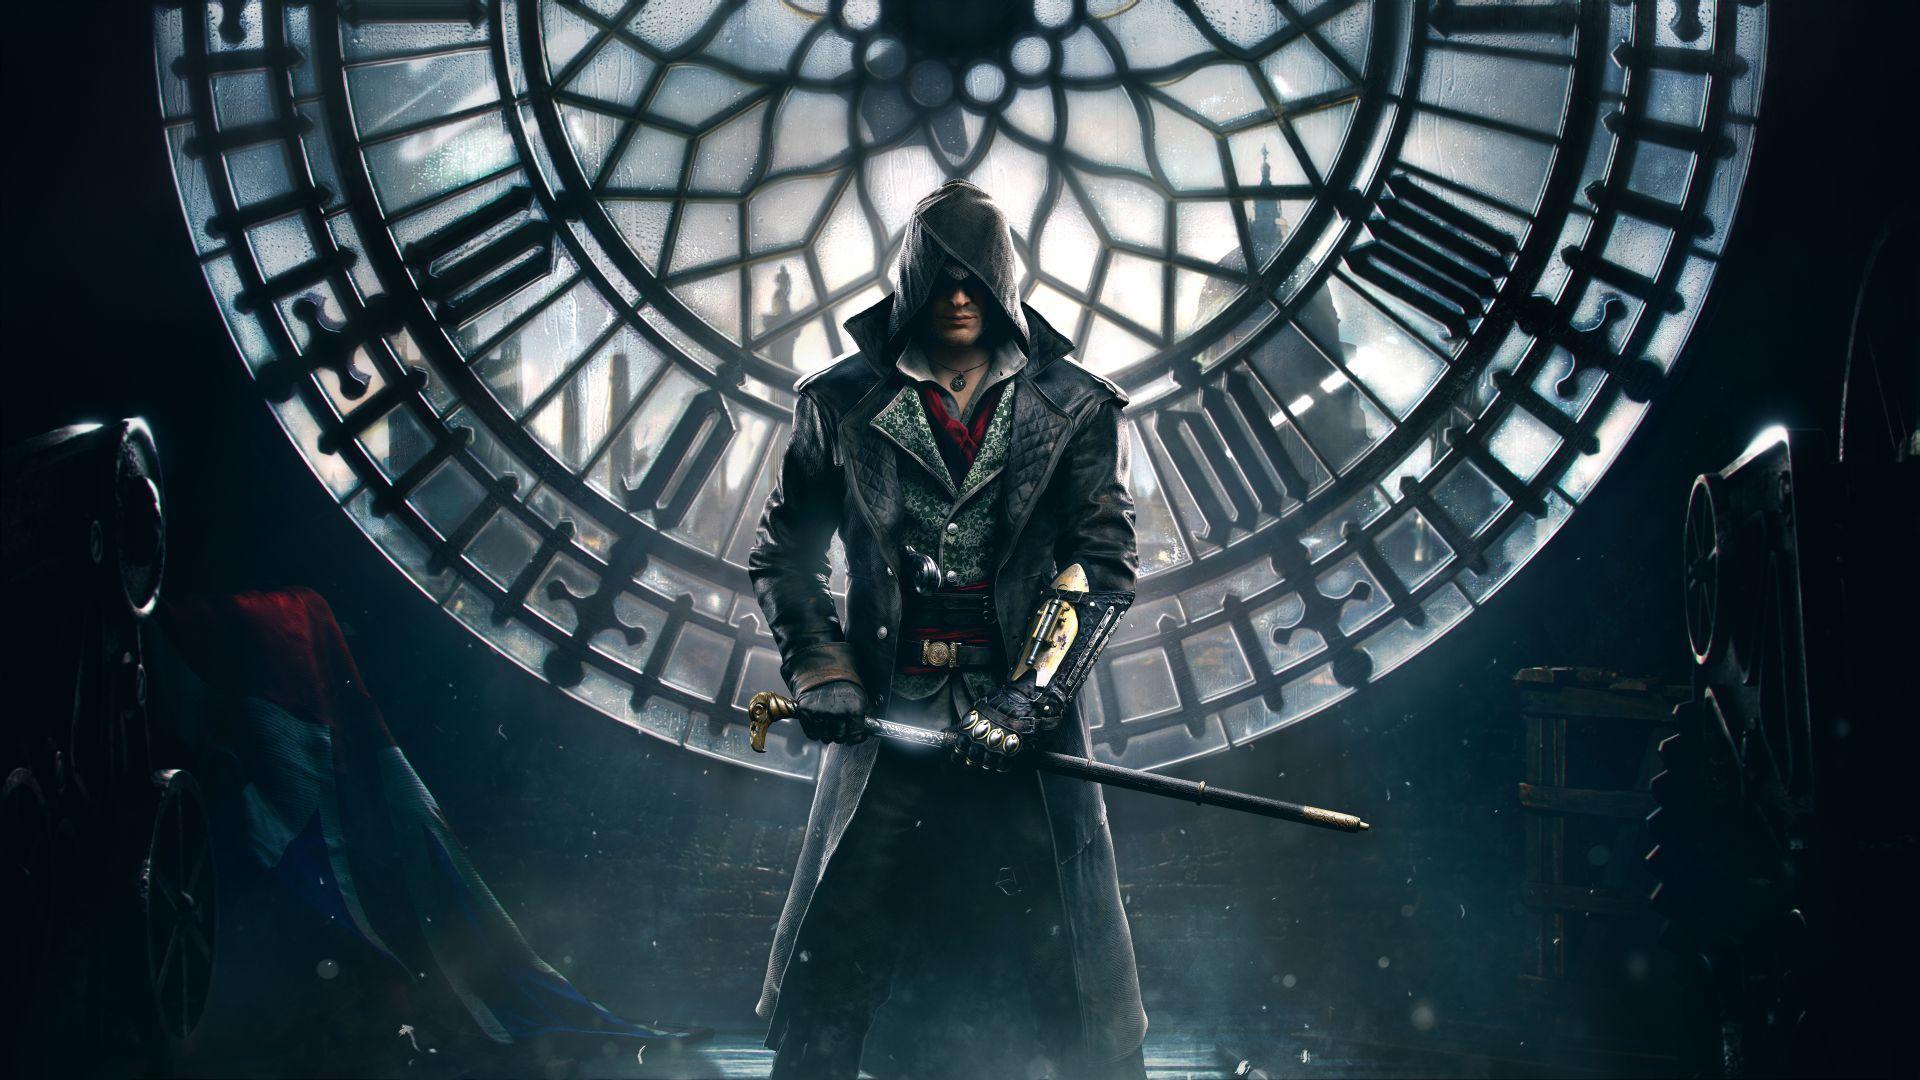 Assassin&Creed Syndicate Wallpapers : assassinscreed